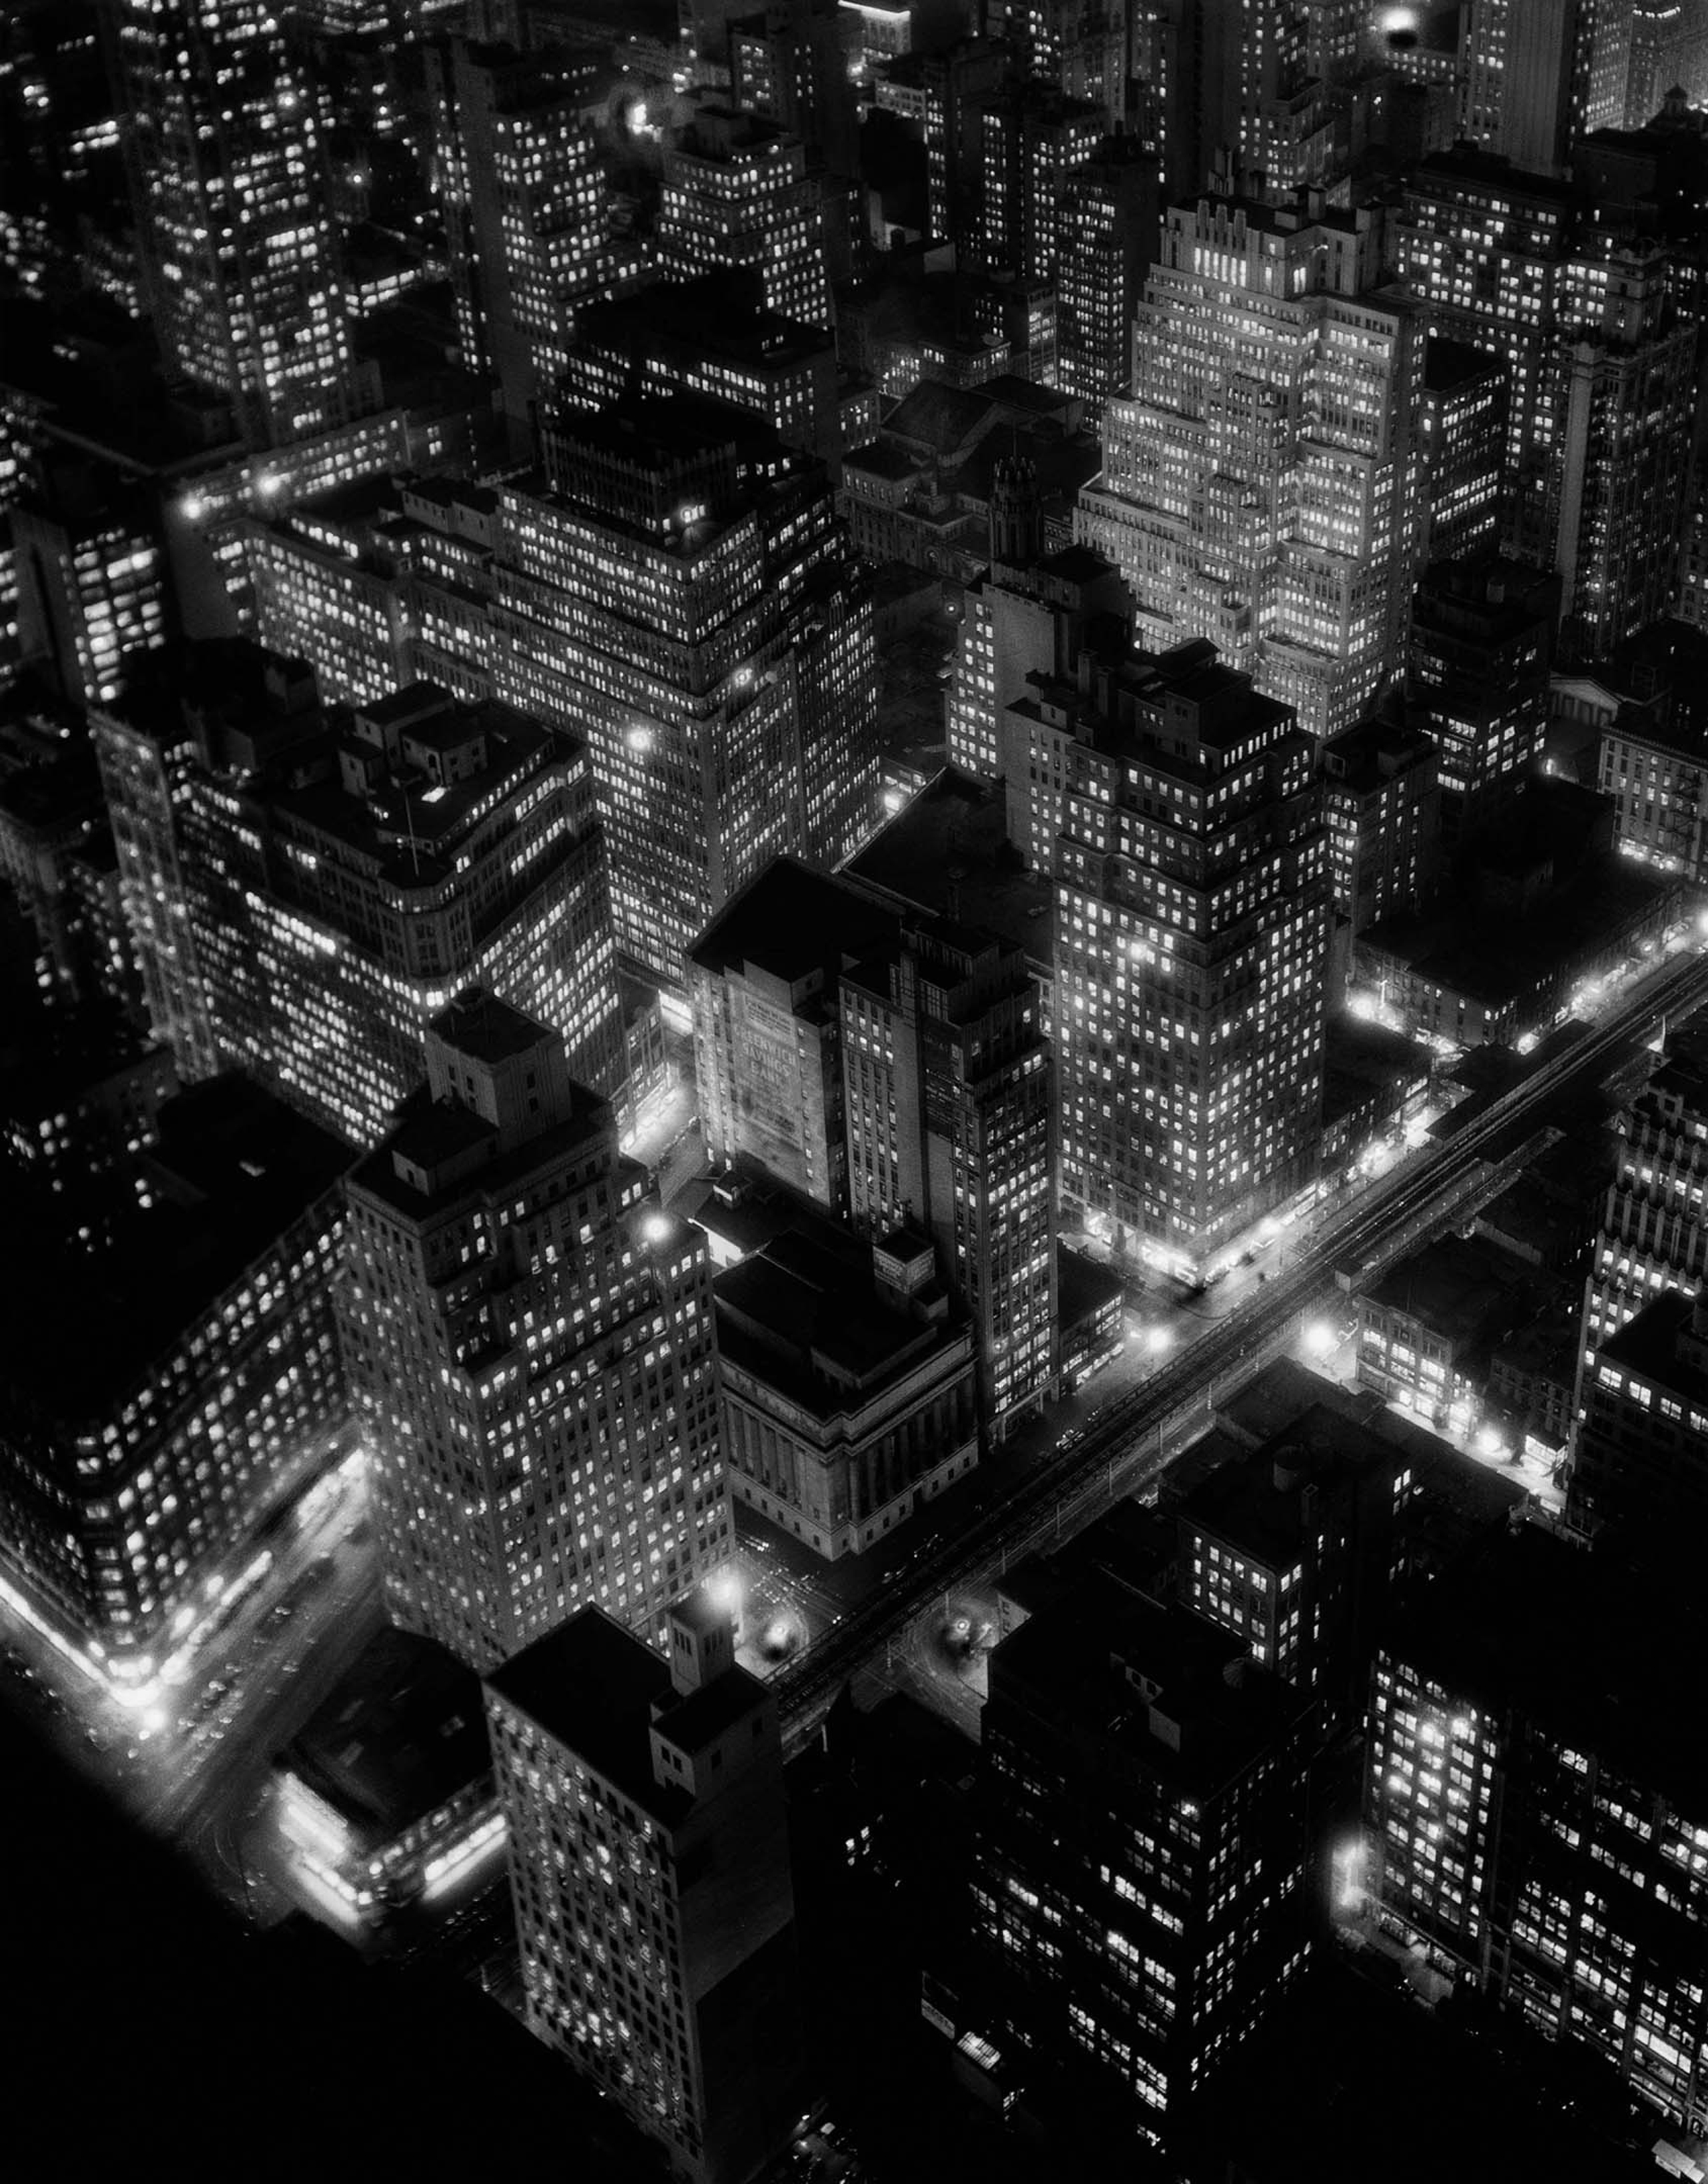 A nighttime view of New York City, 1932.